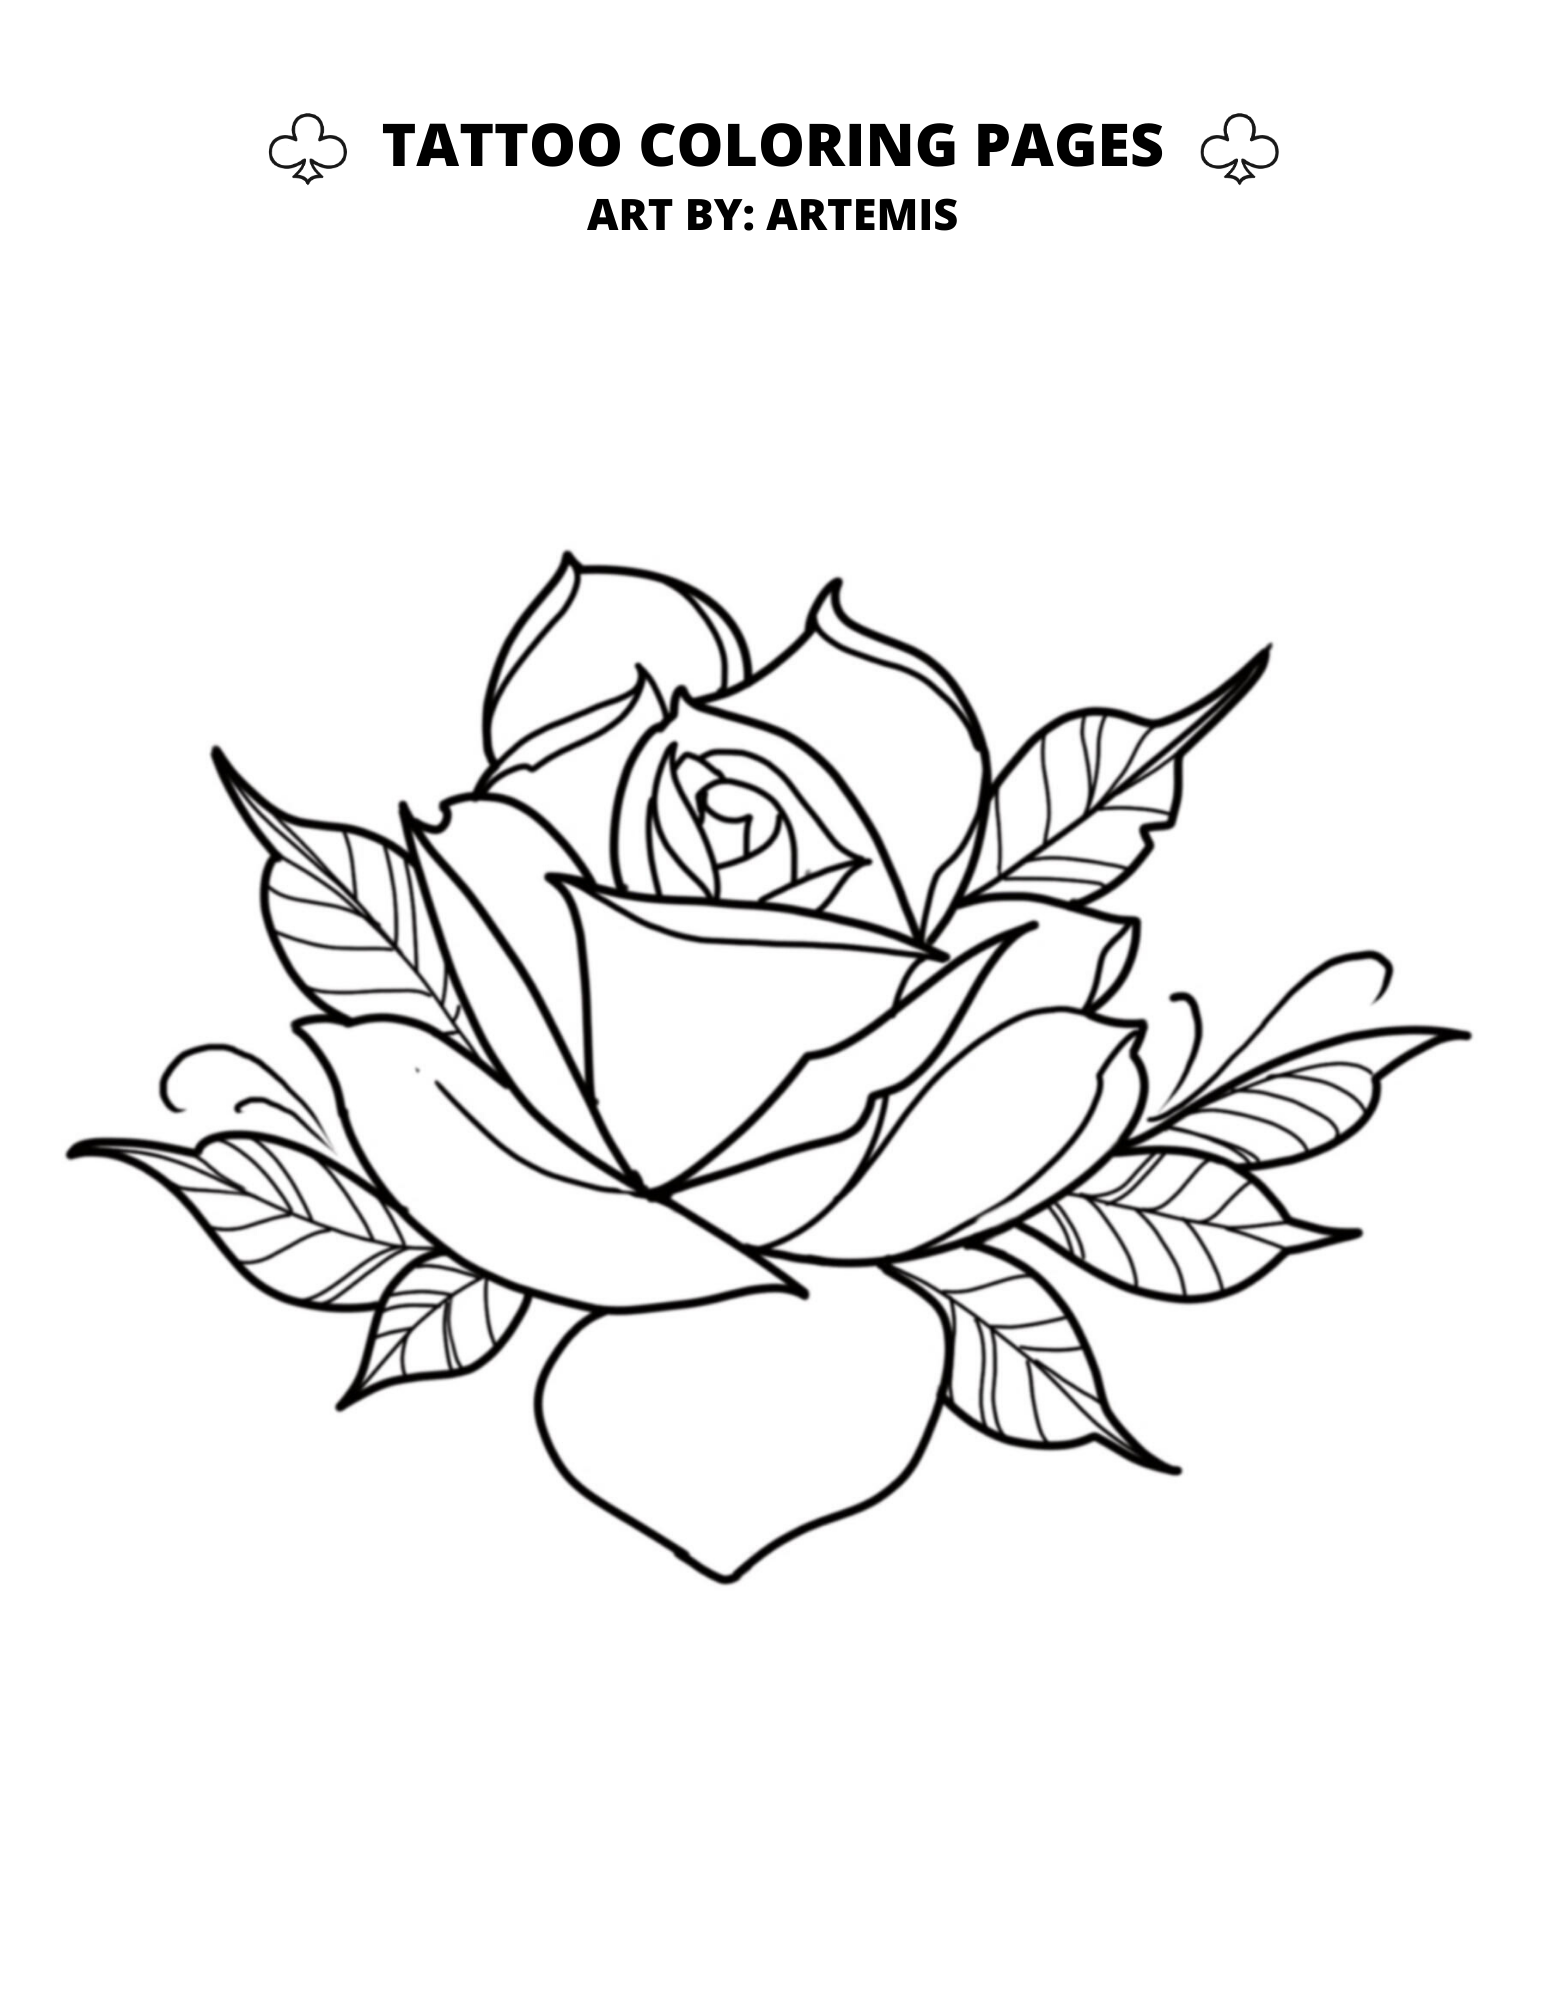 Download Tattoo Coloring Pages - Club Tattoo